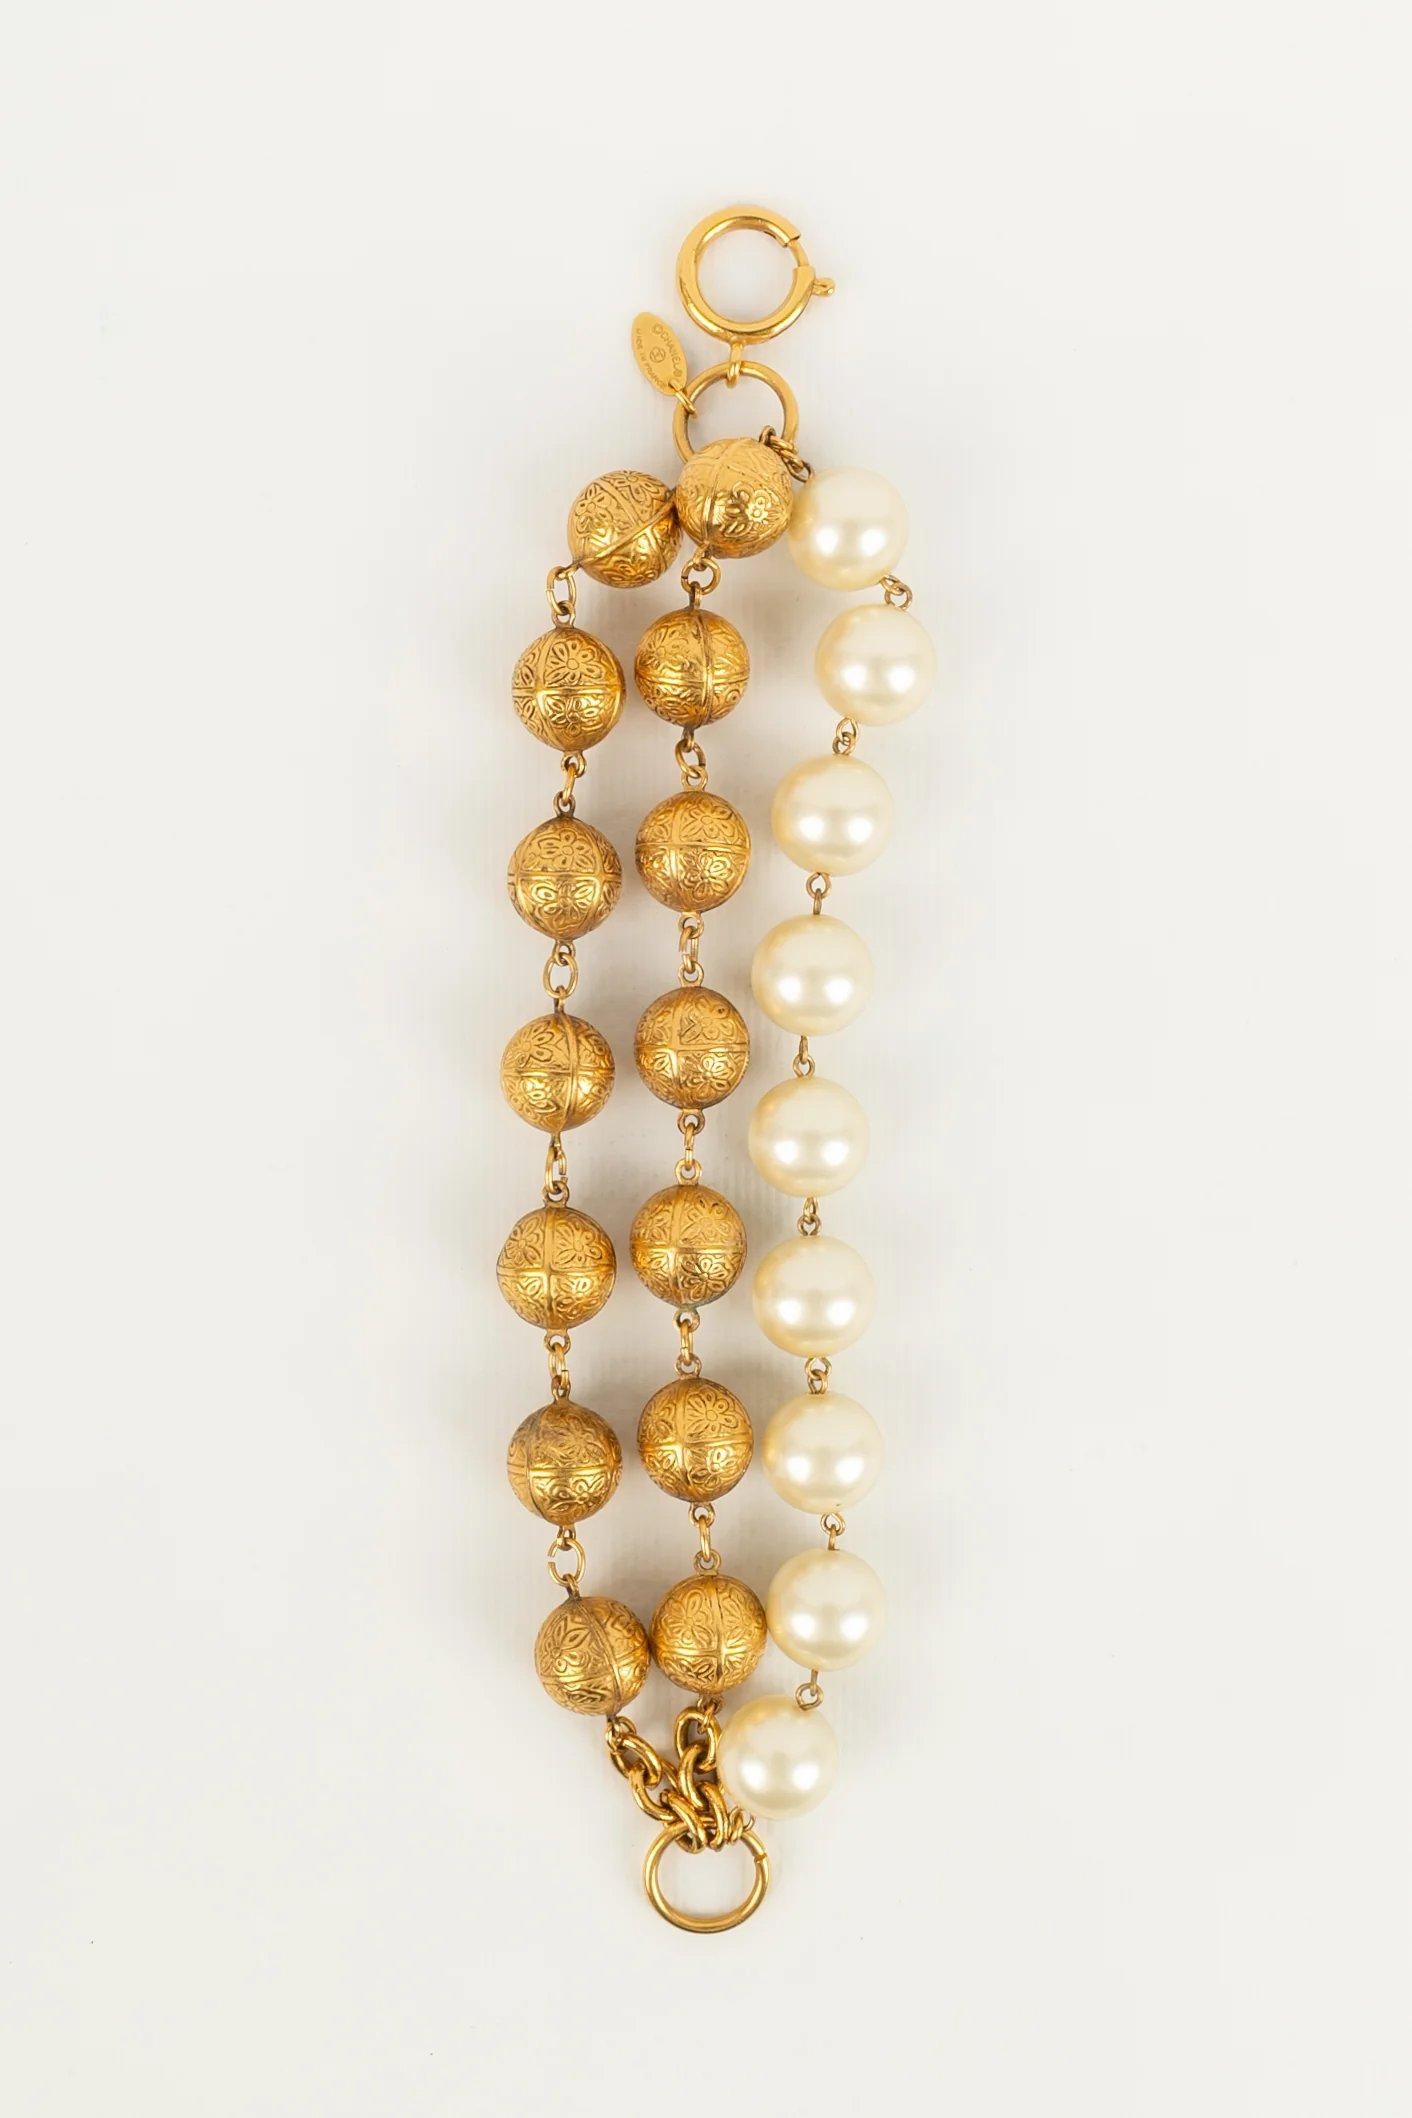 Chanel - (Made in France) Bracelet of pearly pearls and gold metal beads. Jewel from the 1980s.

Additional information:
Dimensions: Length: 22 cm 
Condition: Very good condition
Seller Ref number: BRAB25